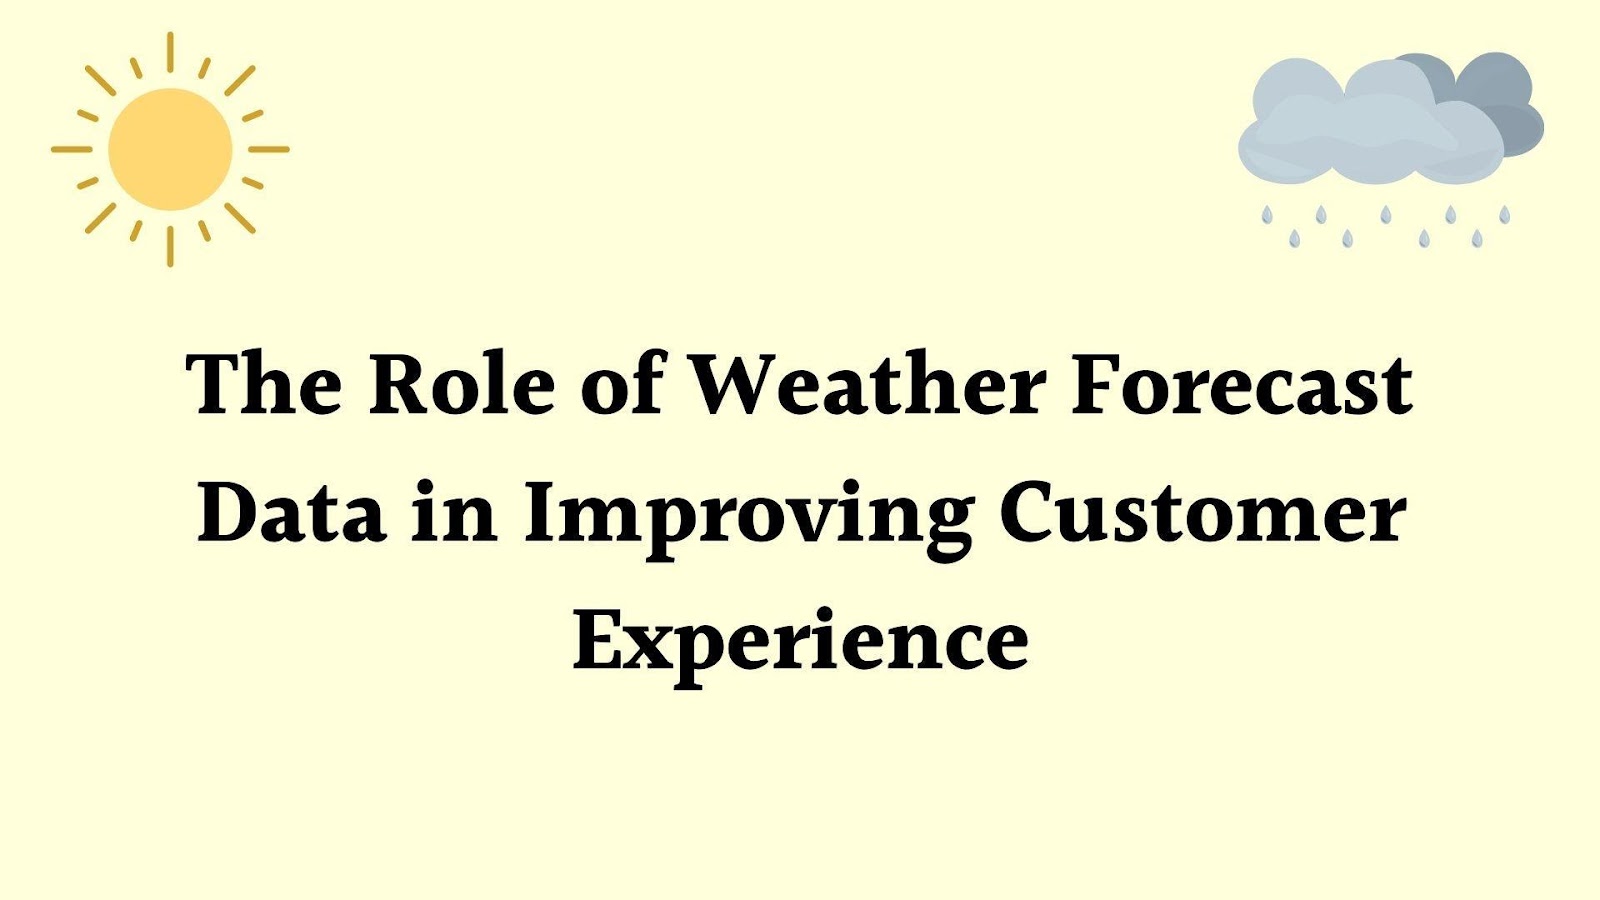 The Role of Weather Forecast Data in Improving Customer Experience